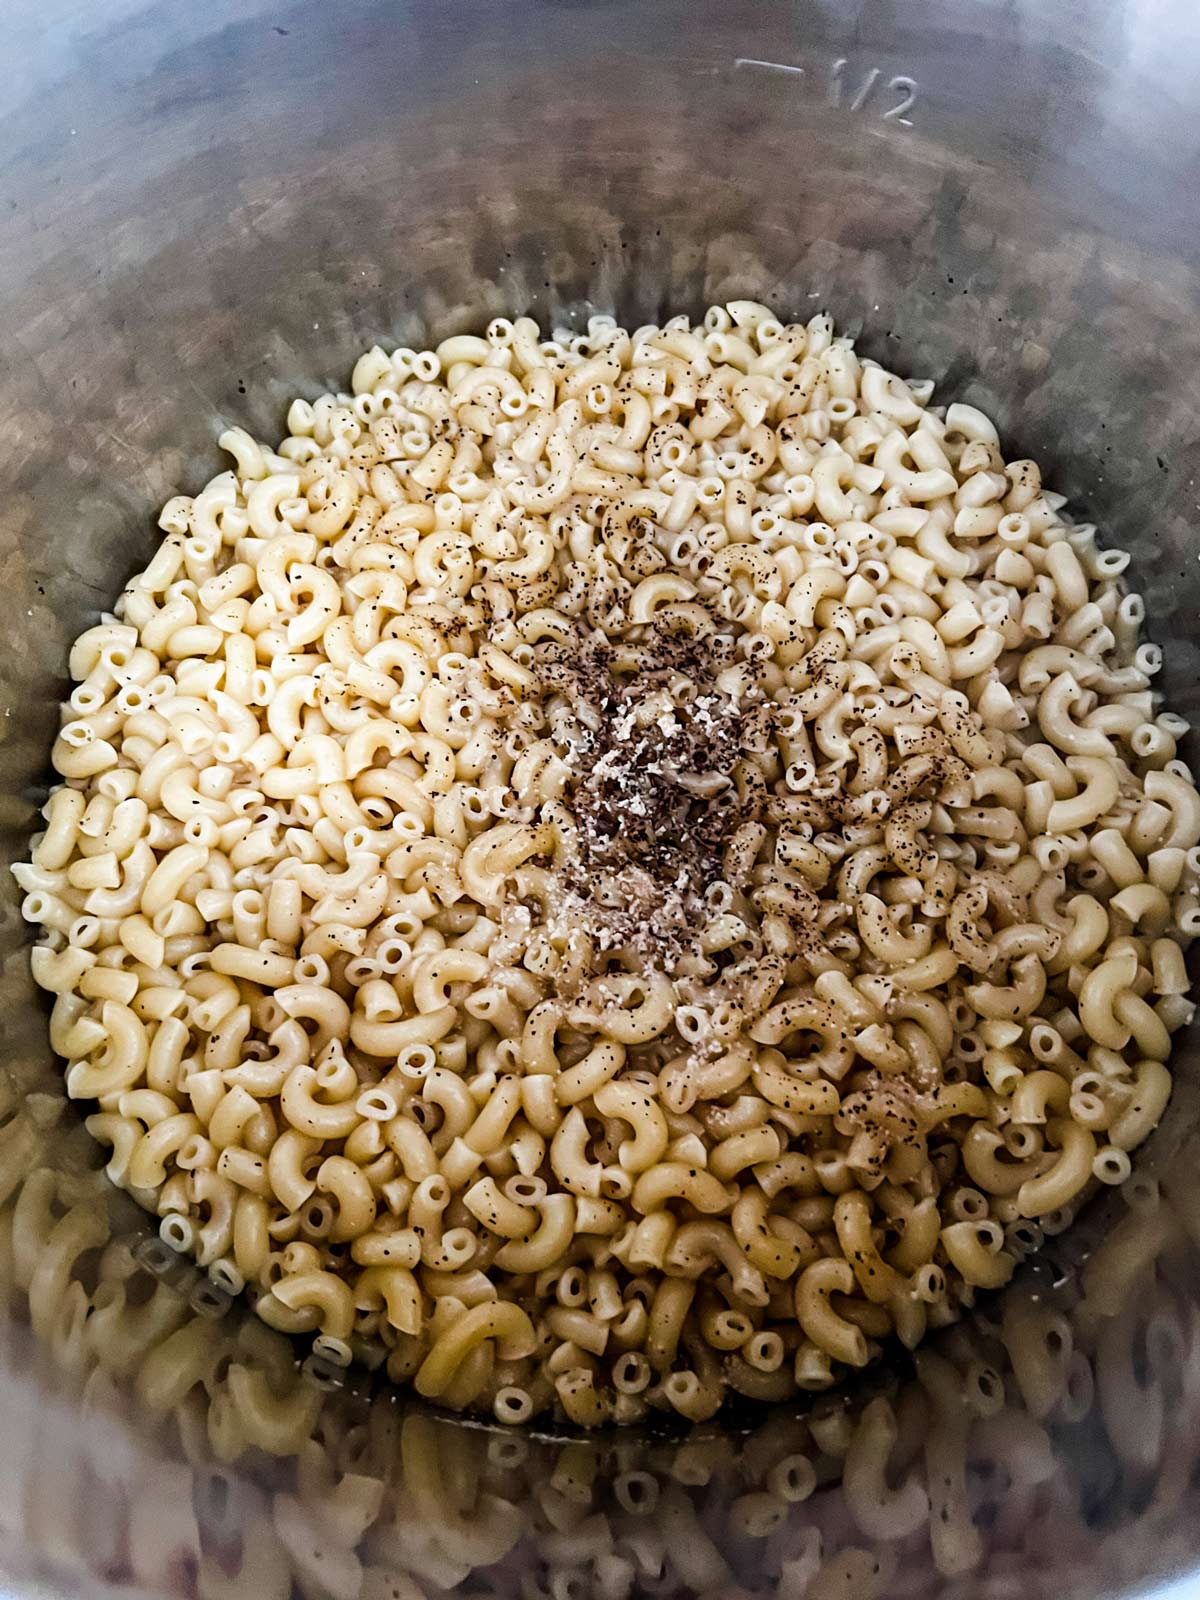 Elbow noodles and seasonings that have been cooked in an Instant Pot.